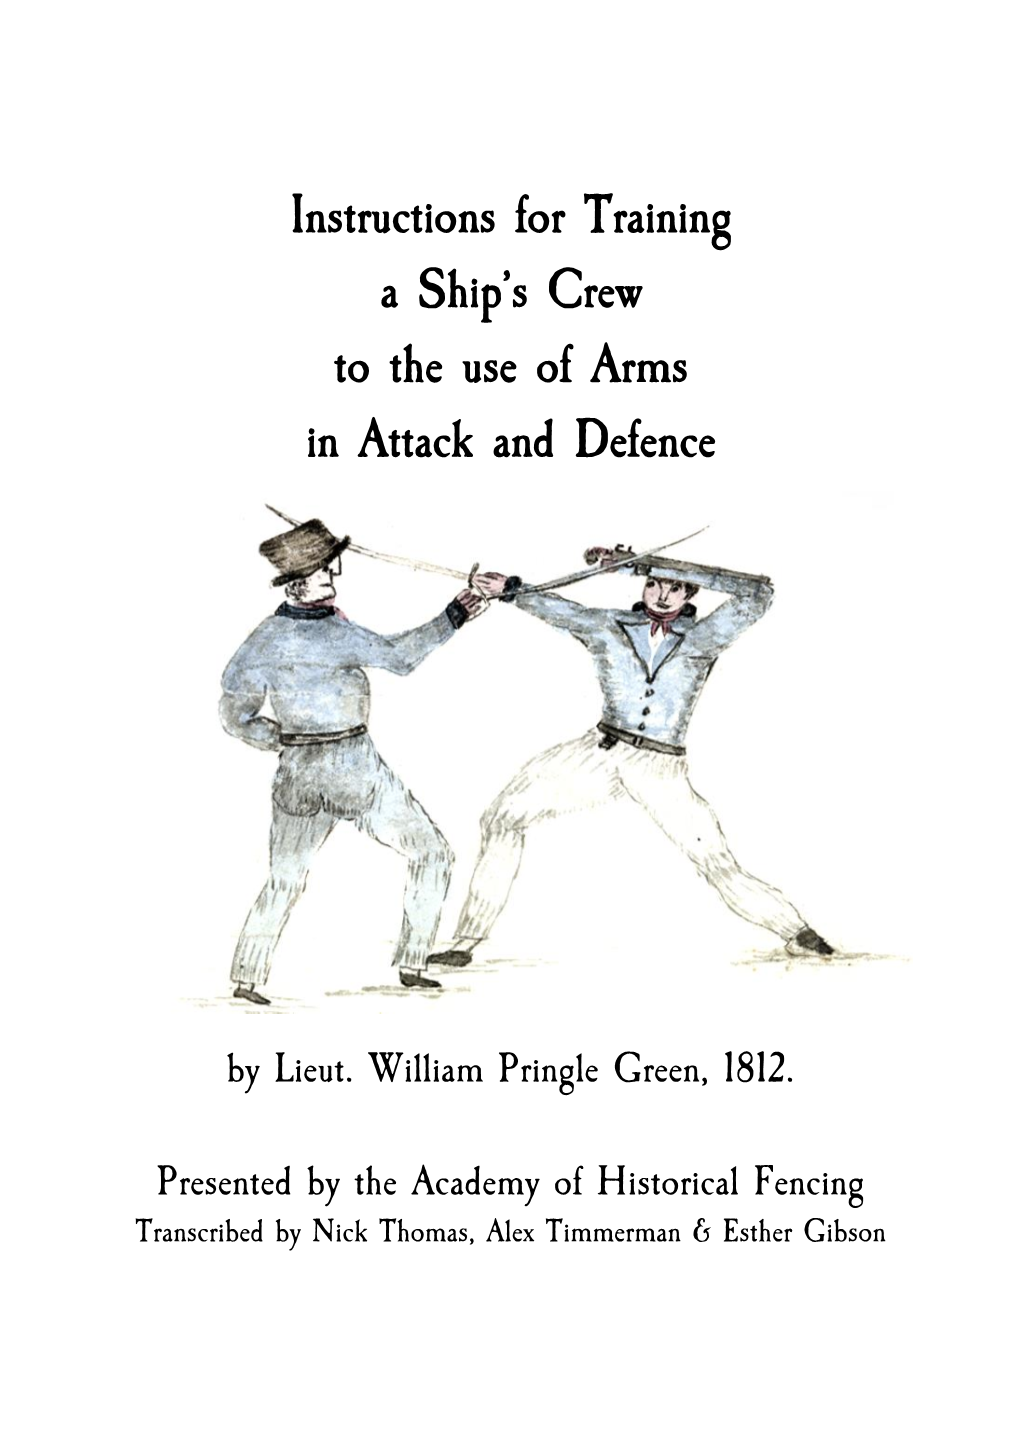 Instructions for Training a Ship's Crew to the Use of Arms in Attack And